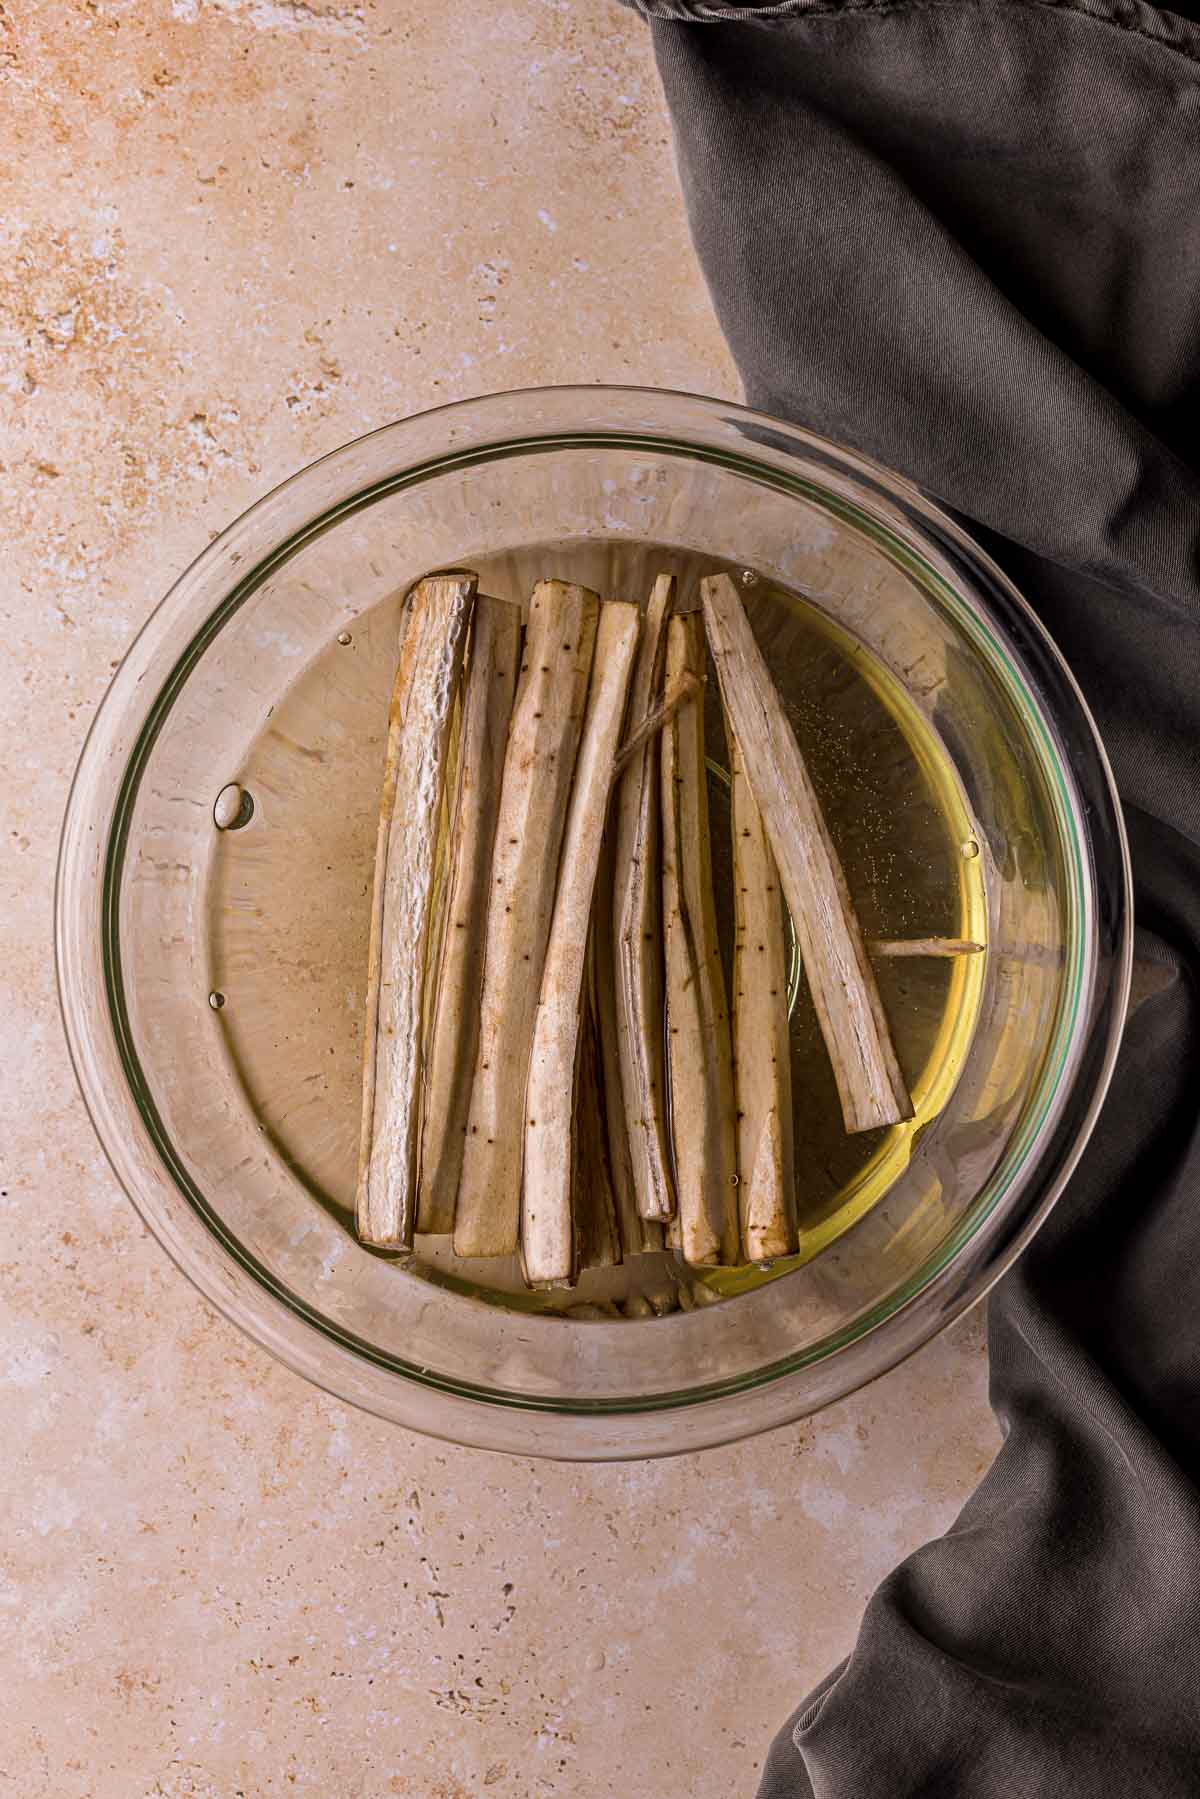 white vegetable sticks in a bowl of clear liquid